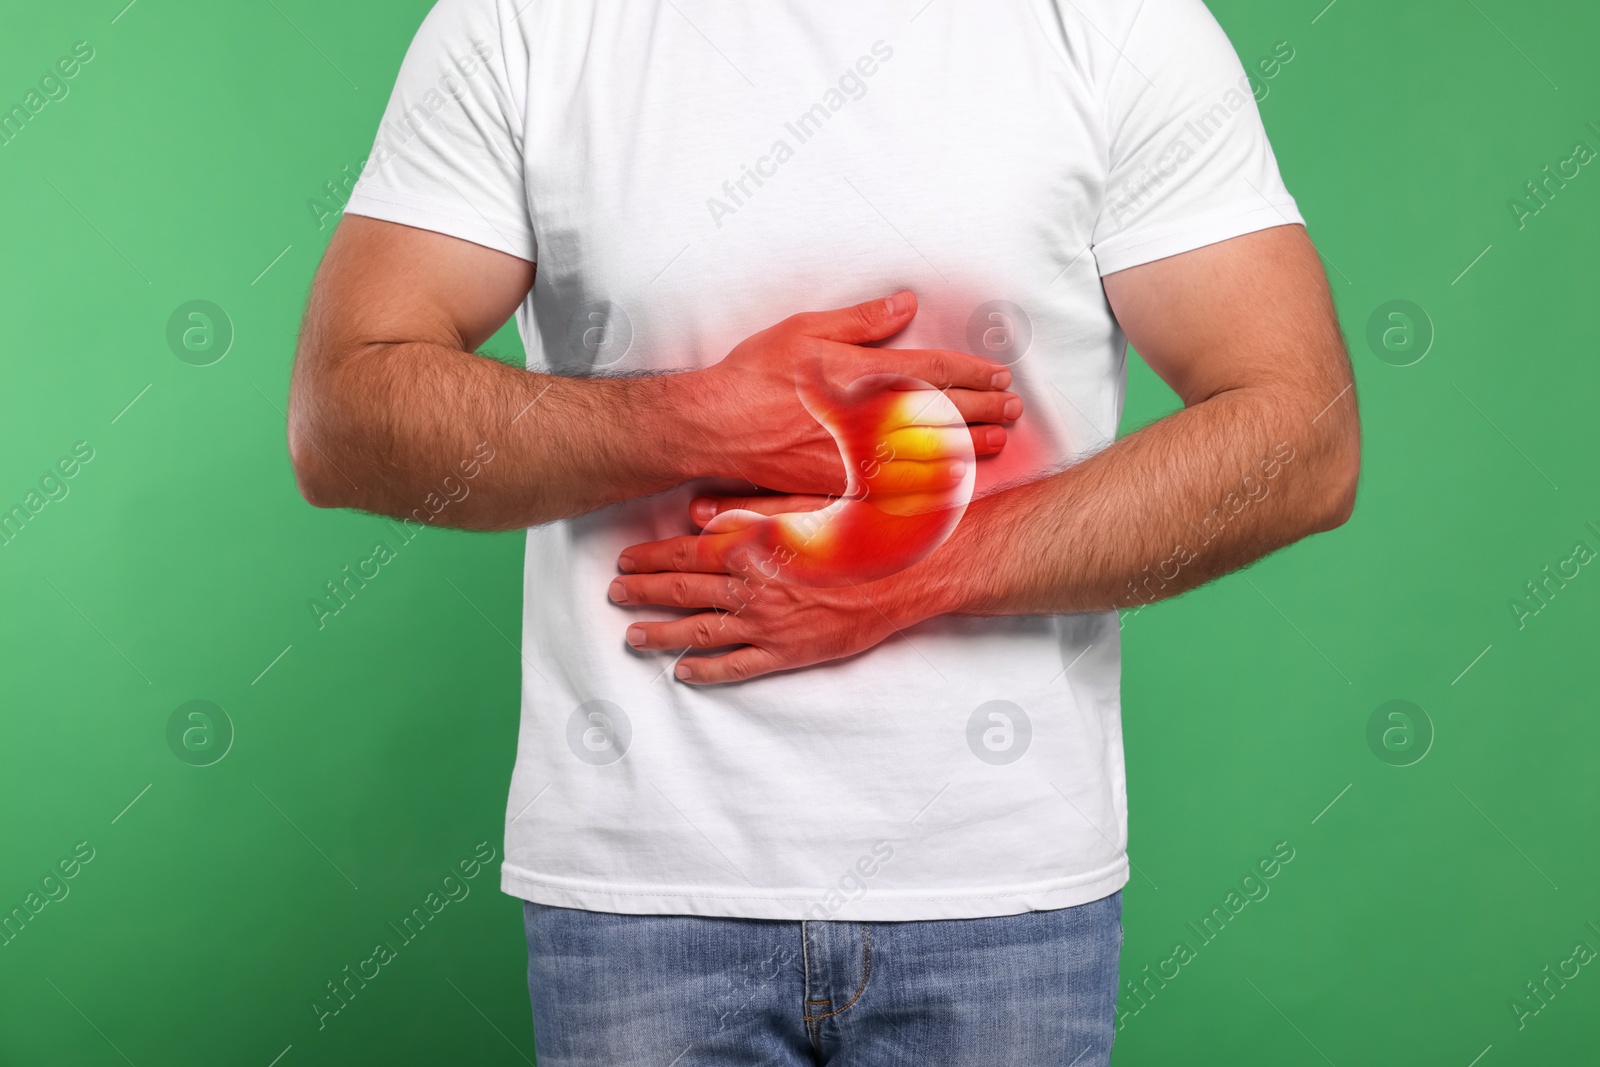 Image of Man suffering from abdominal pain on green background, closeup. Illustration of unhealthy stomach